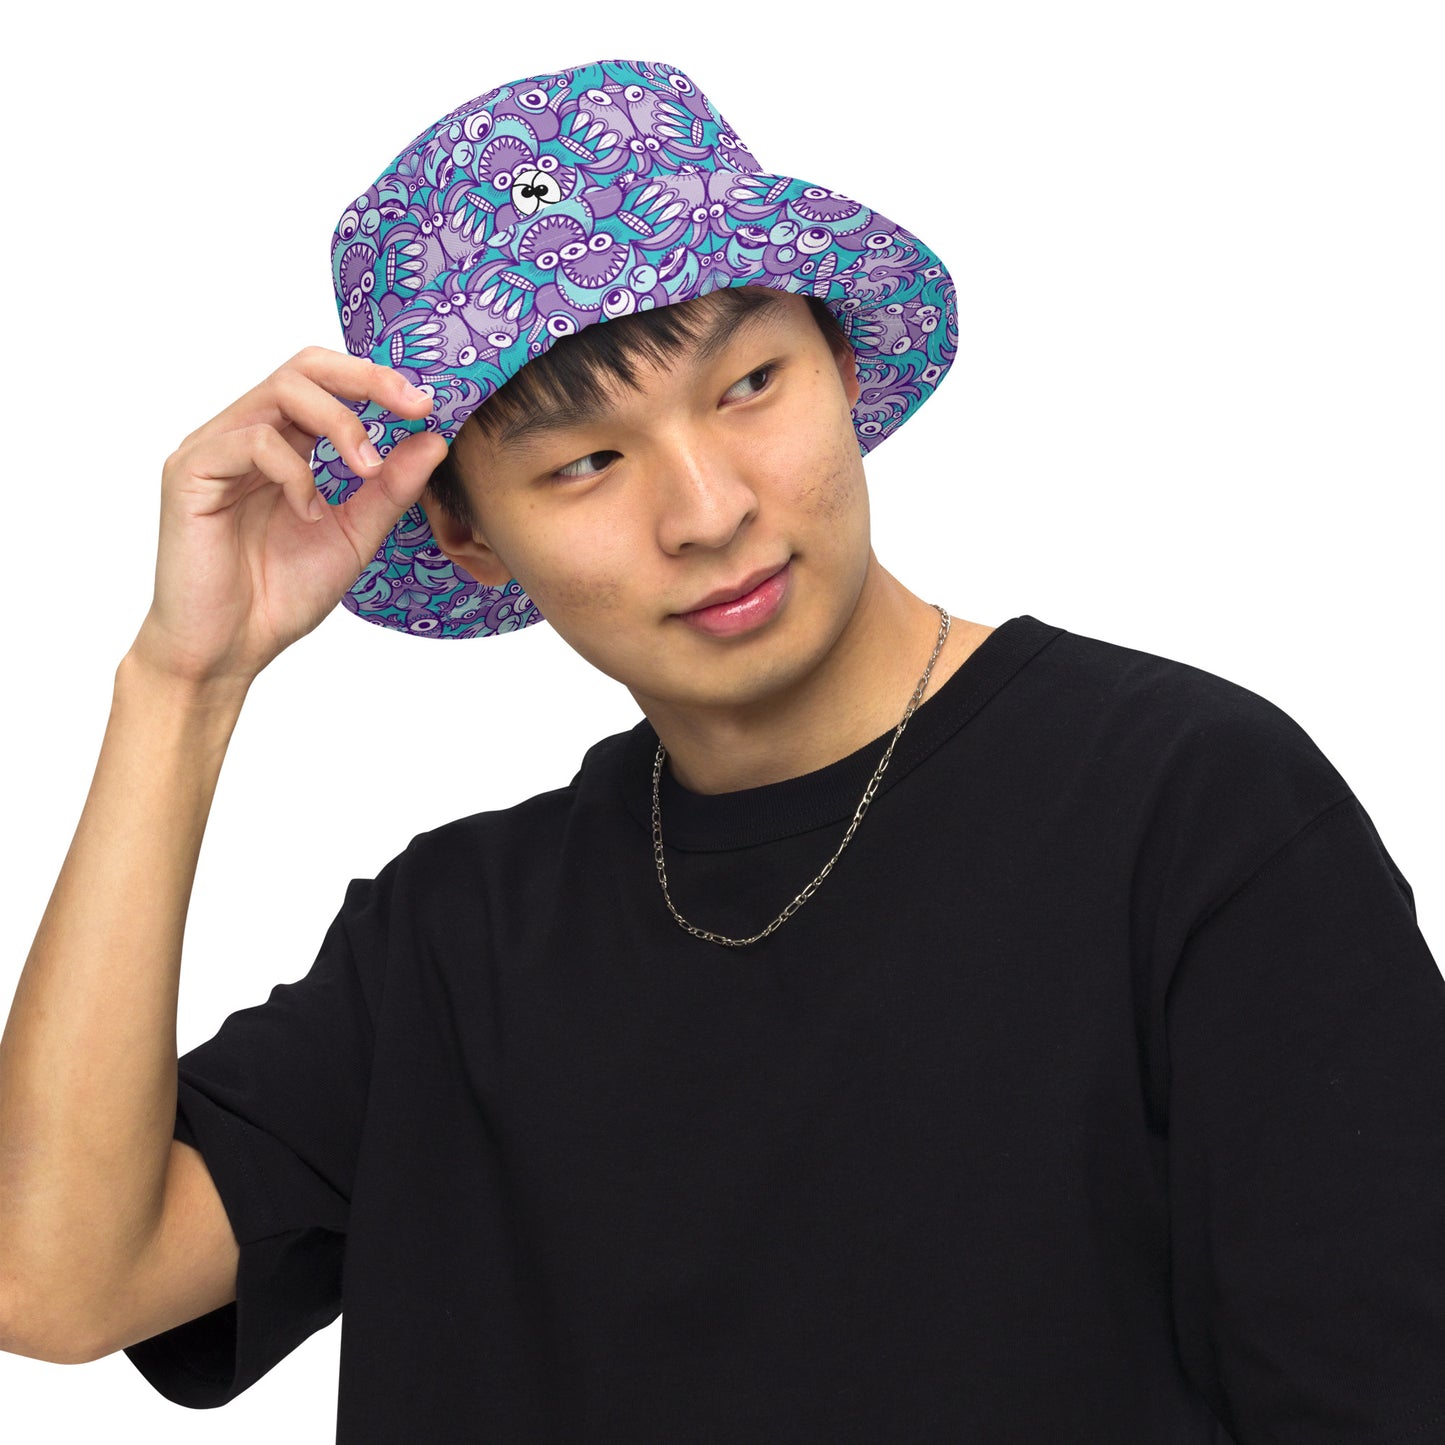 Planet 5: Aquatic Creatures from the Doodles of the Galaxy - Reversible Bucket Hat. Front view